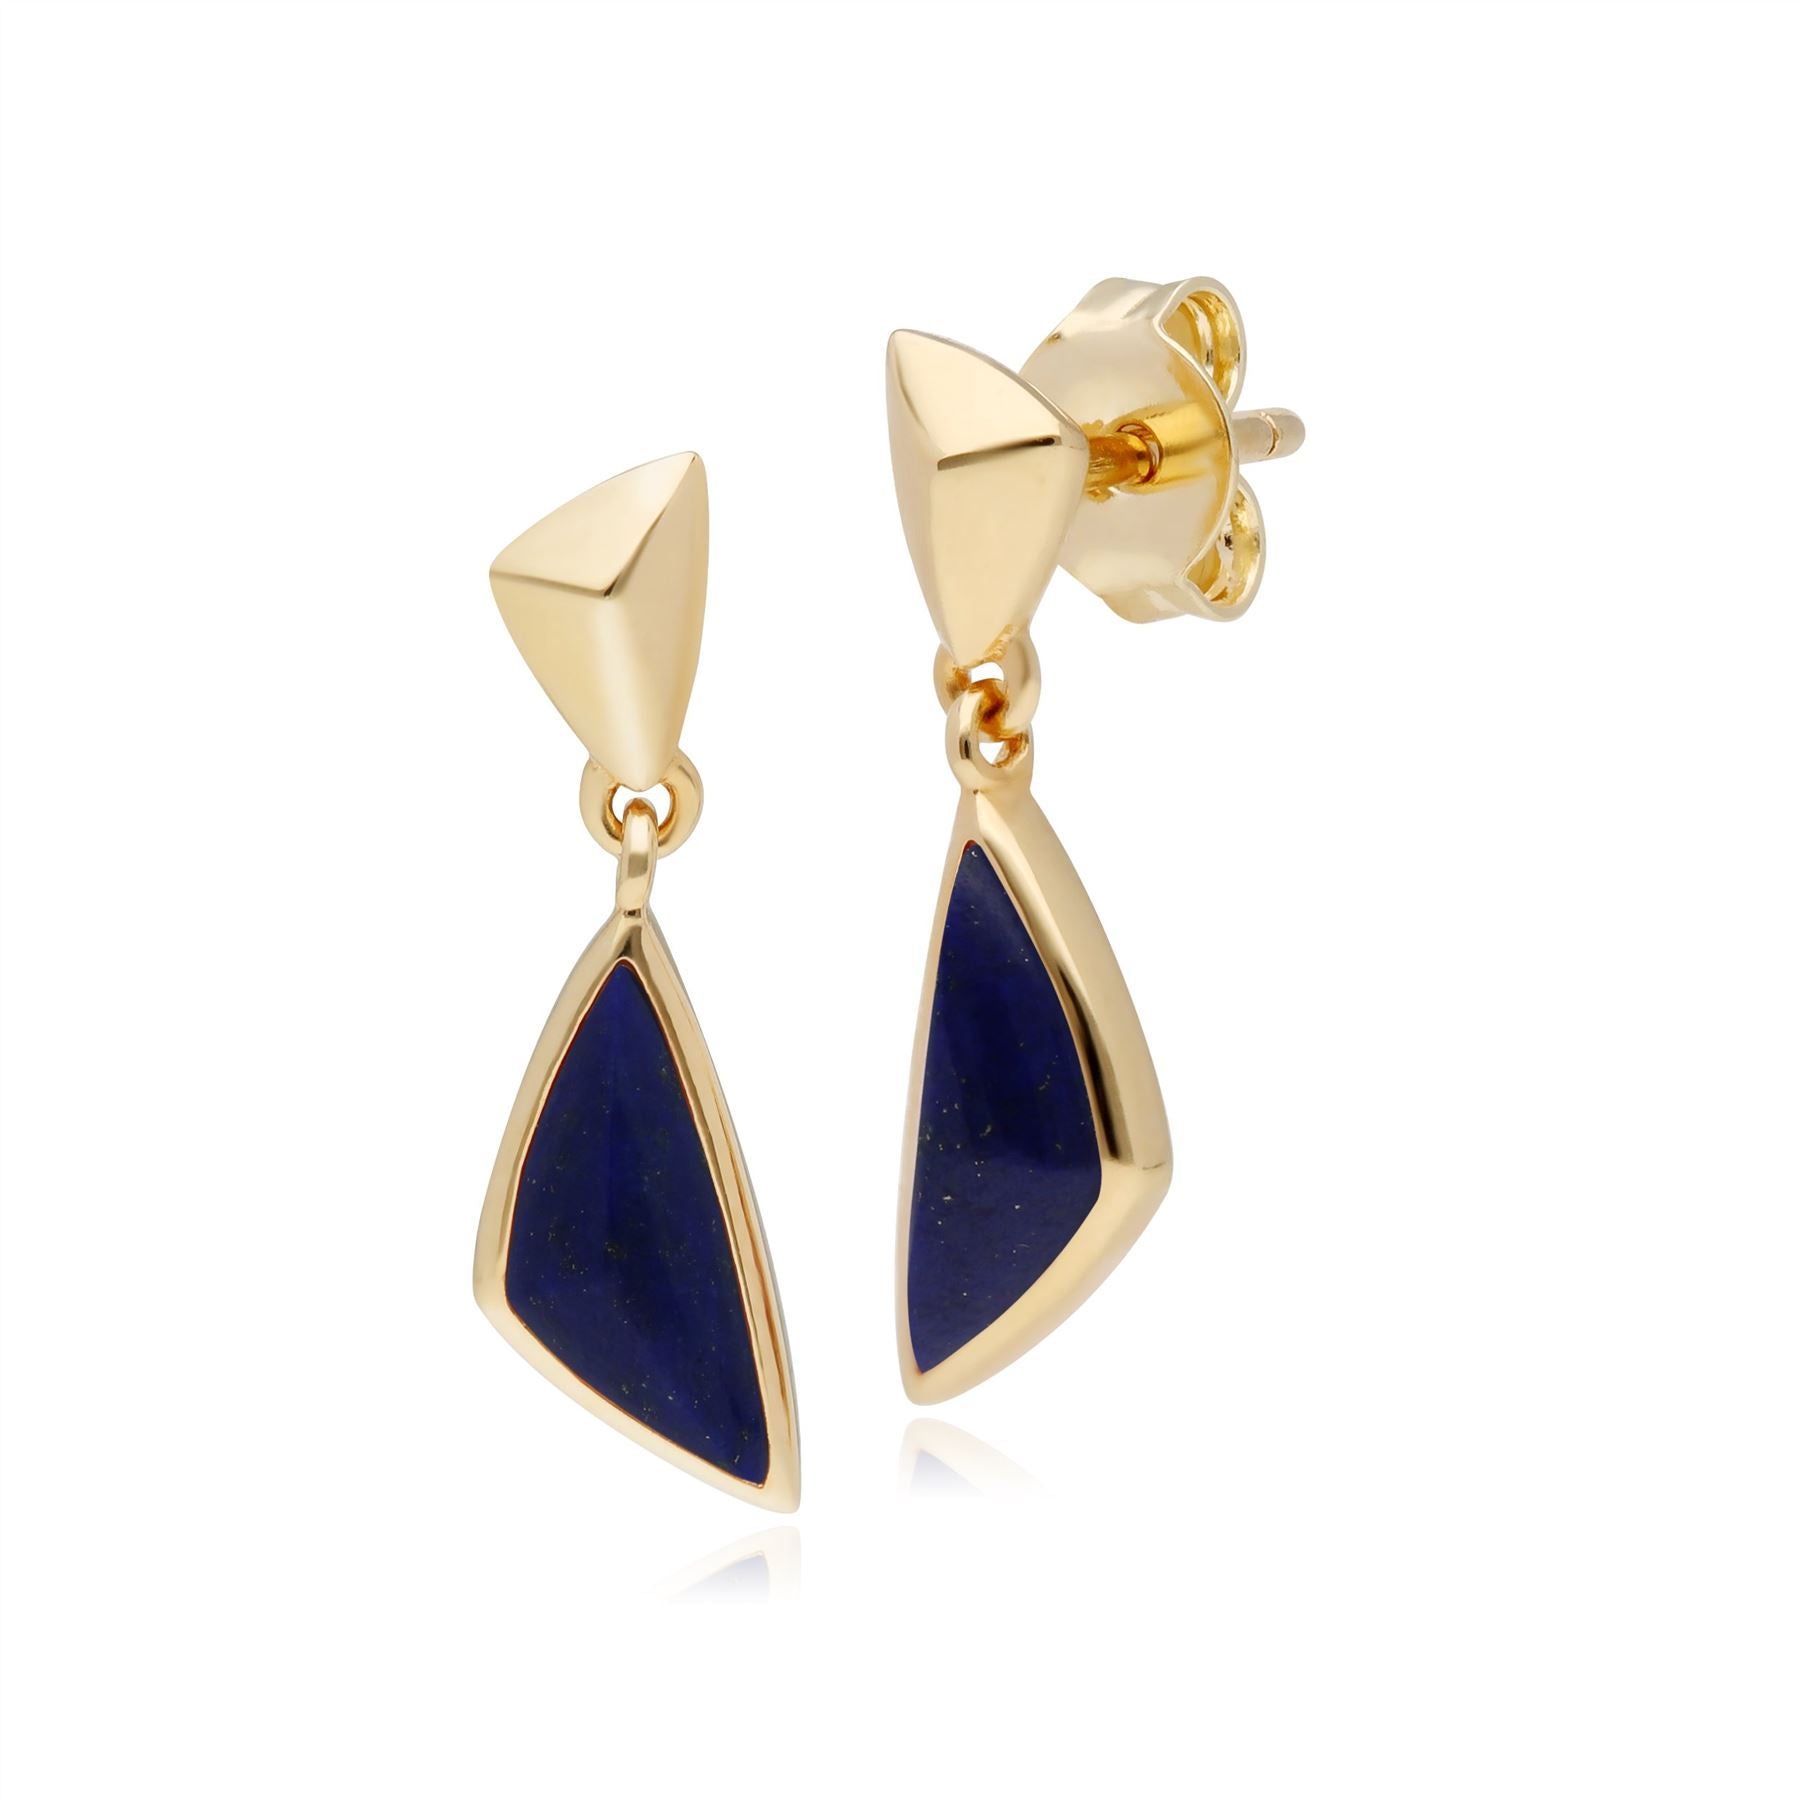 Micro Statement Lapis Lazuli Drop Earrings in Gold Plated 925 Sterling Silver